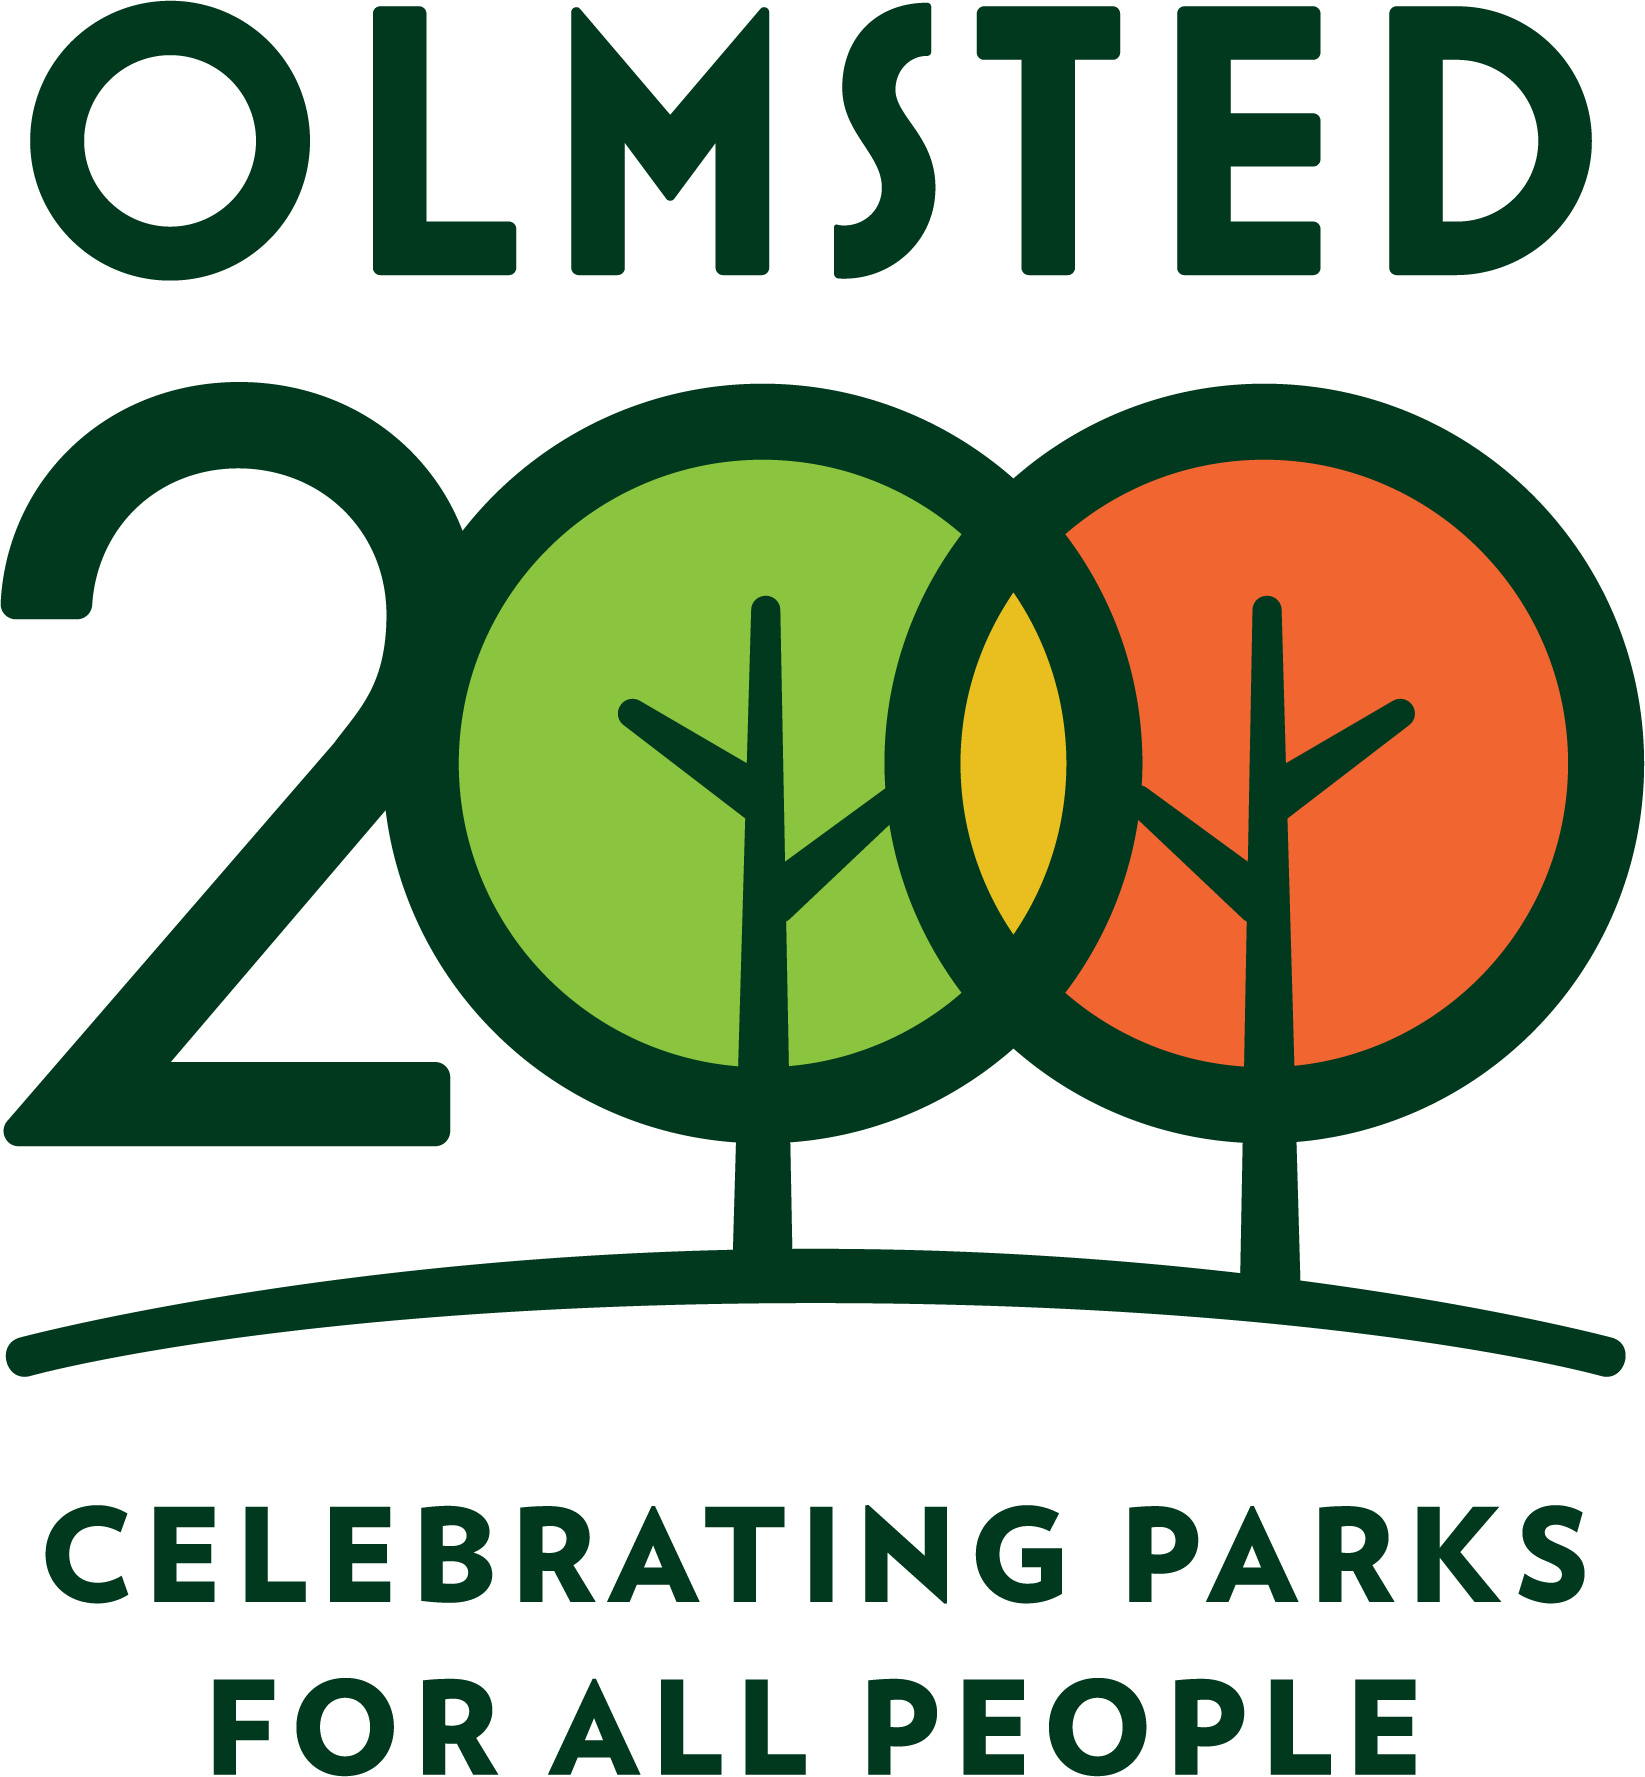 Olmsted 200